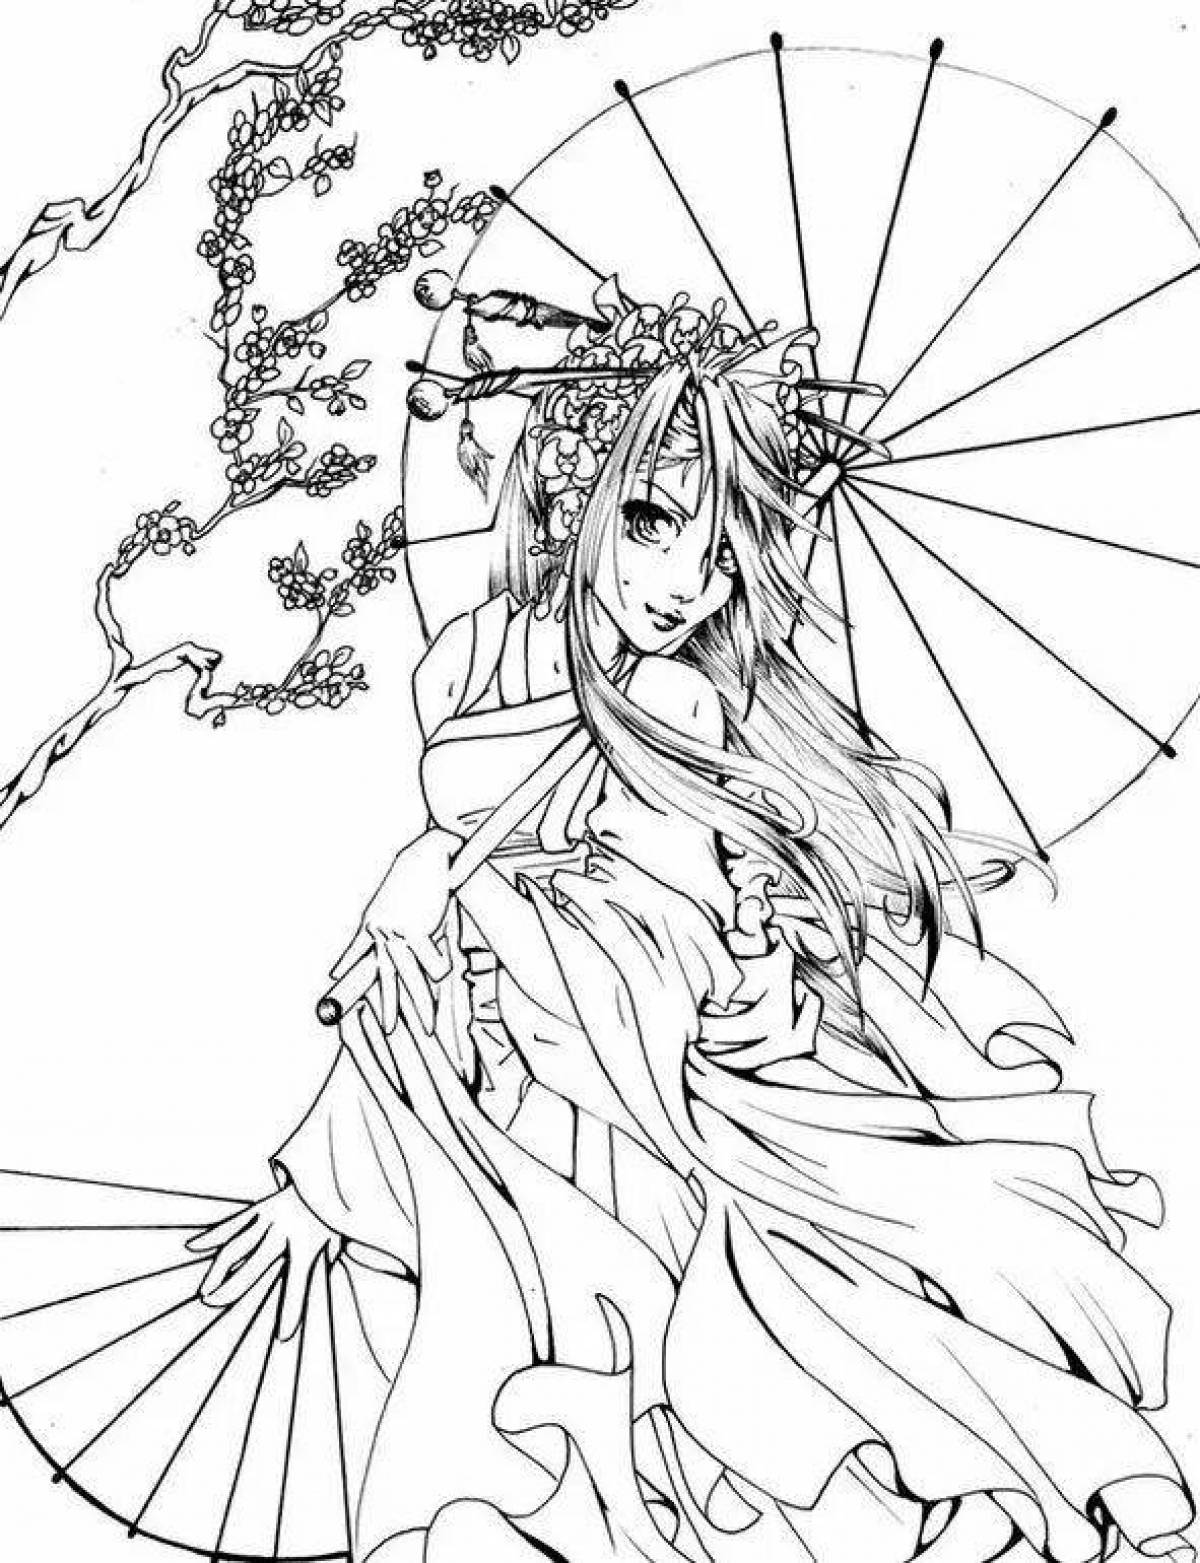 Exquisite anime adult coloring book